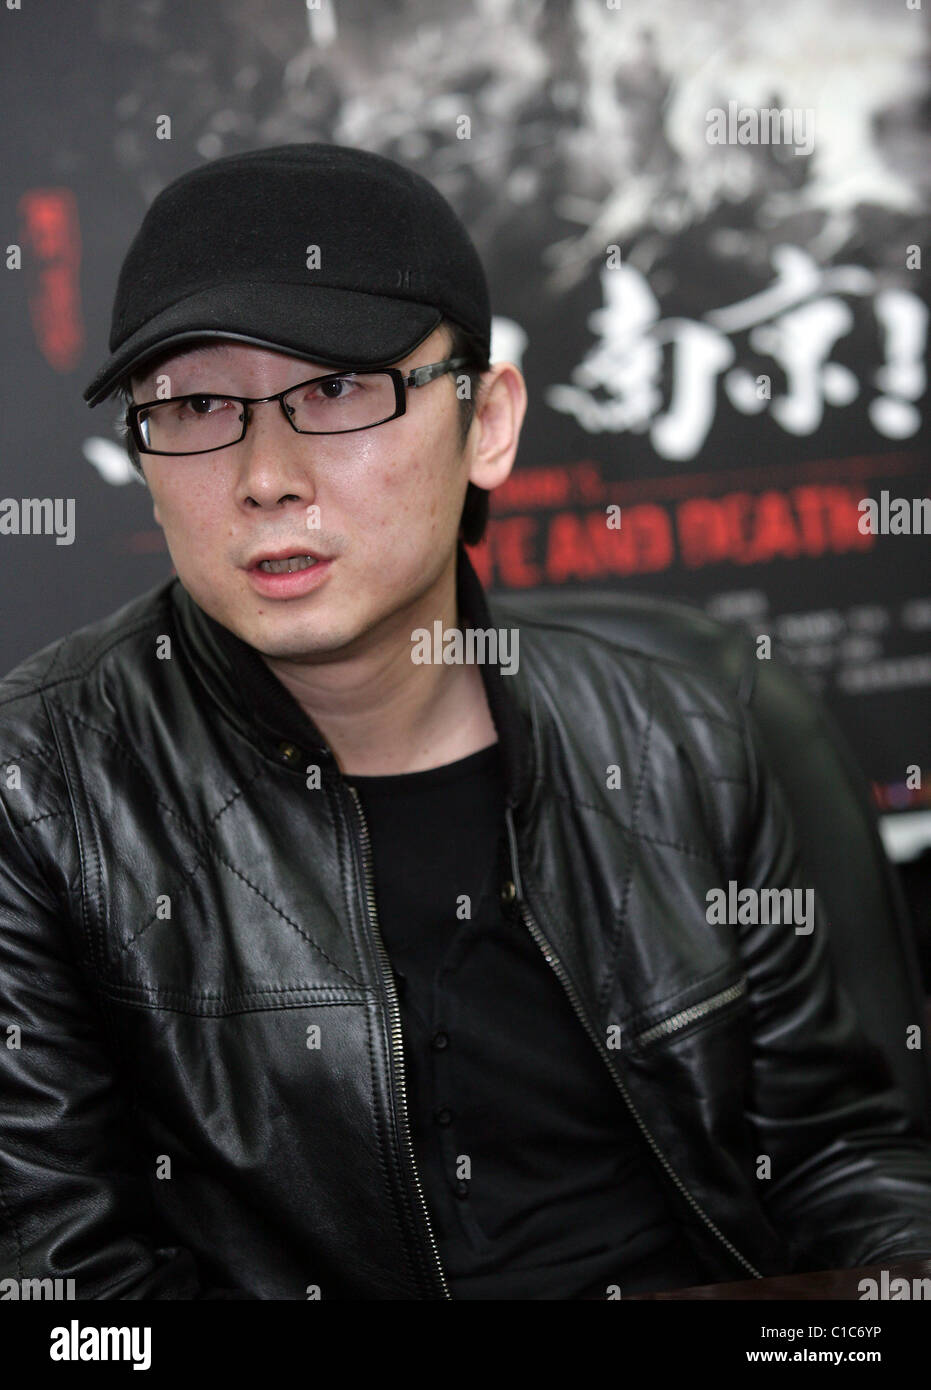 Director Lu Chuan  attends a press conference for the film 'City of Life And Death' (Nanjing! Nanjing!) Beijing, China - 030409 Stock Photo